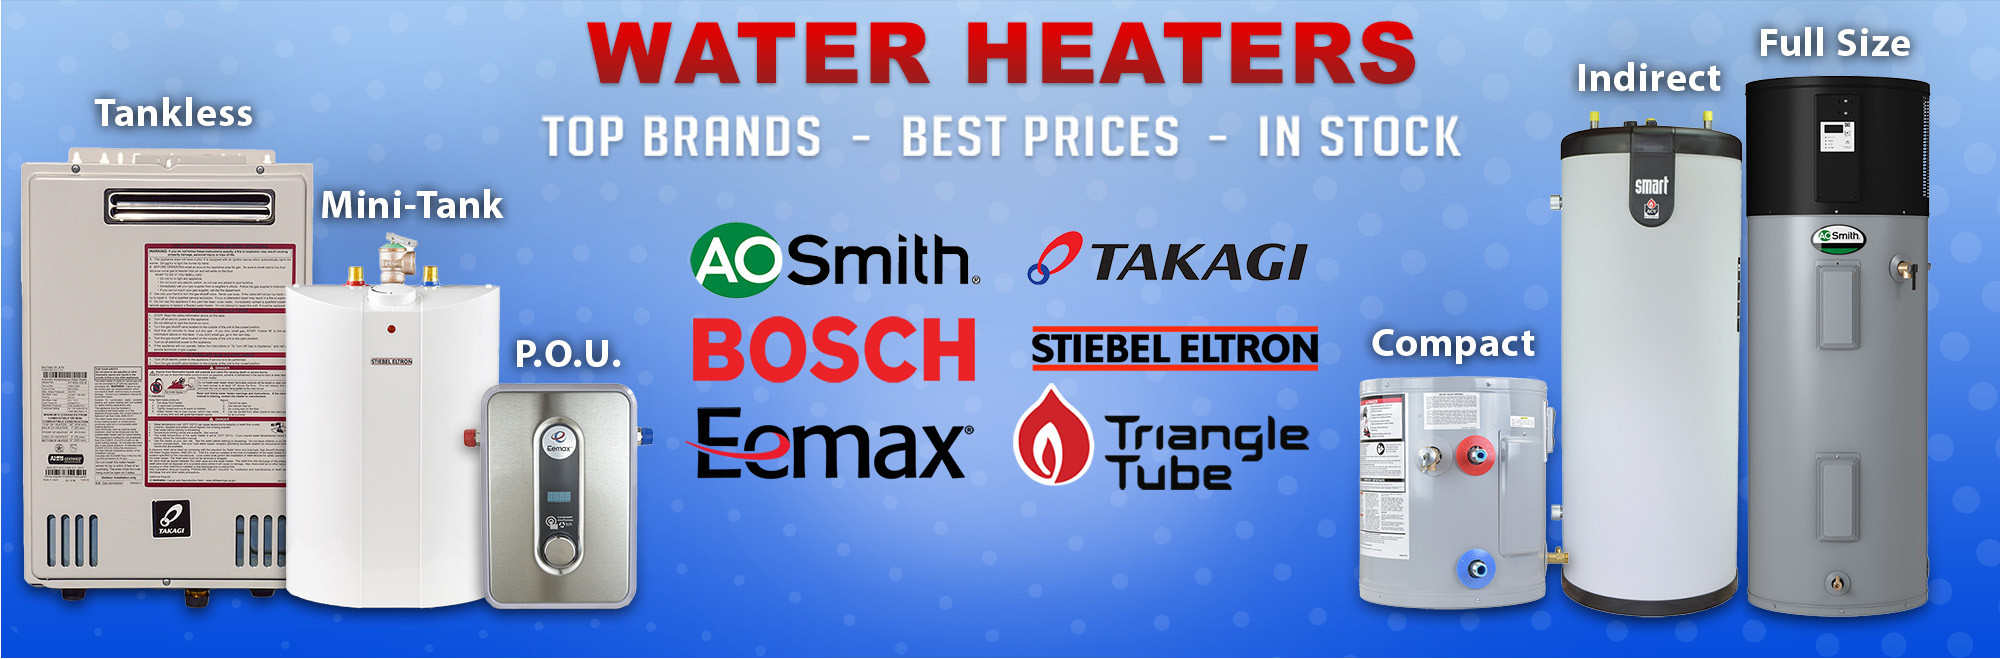 Water Heaters - Tankless, Mini-Tank, Standard, Point of Use